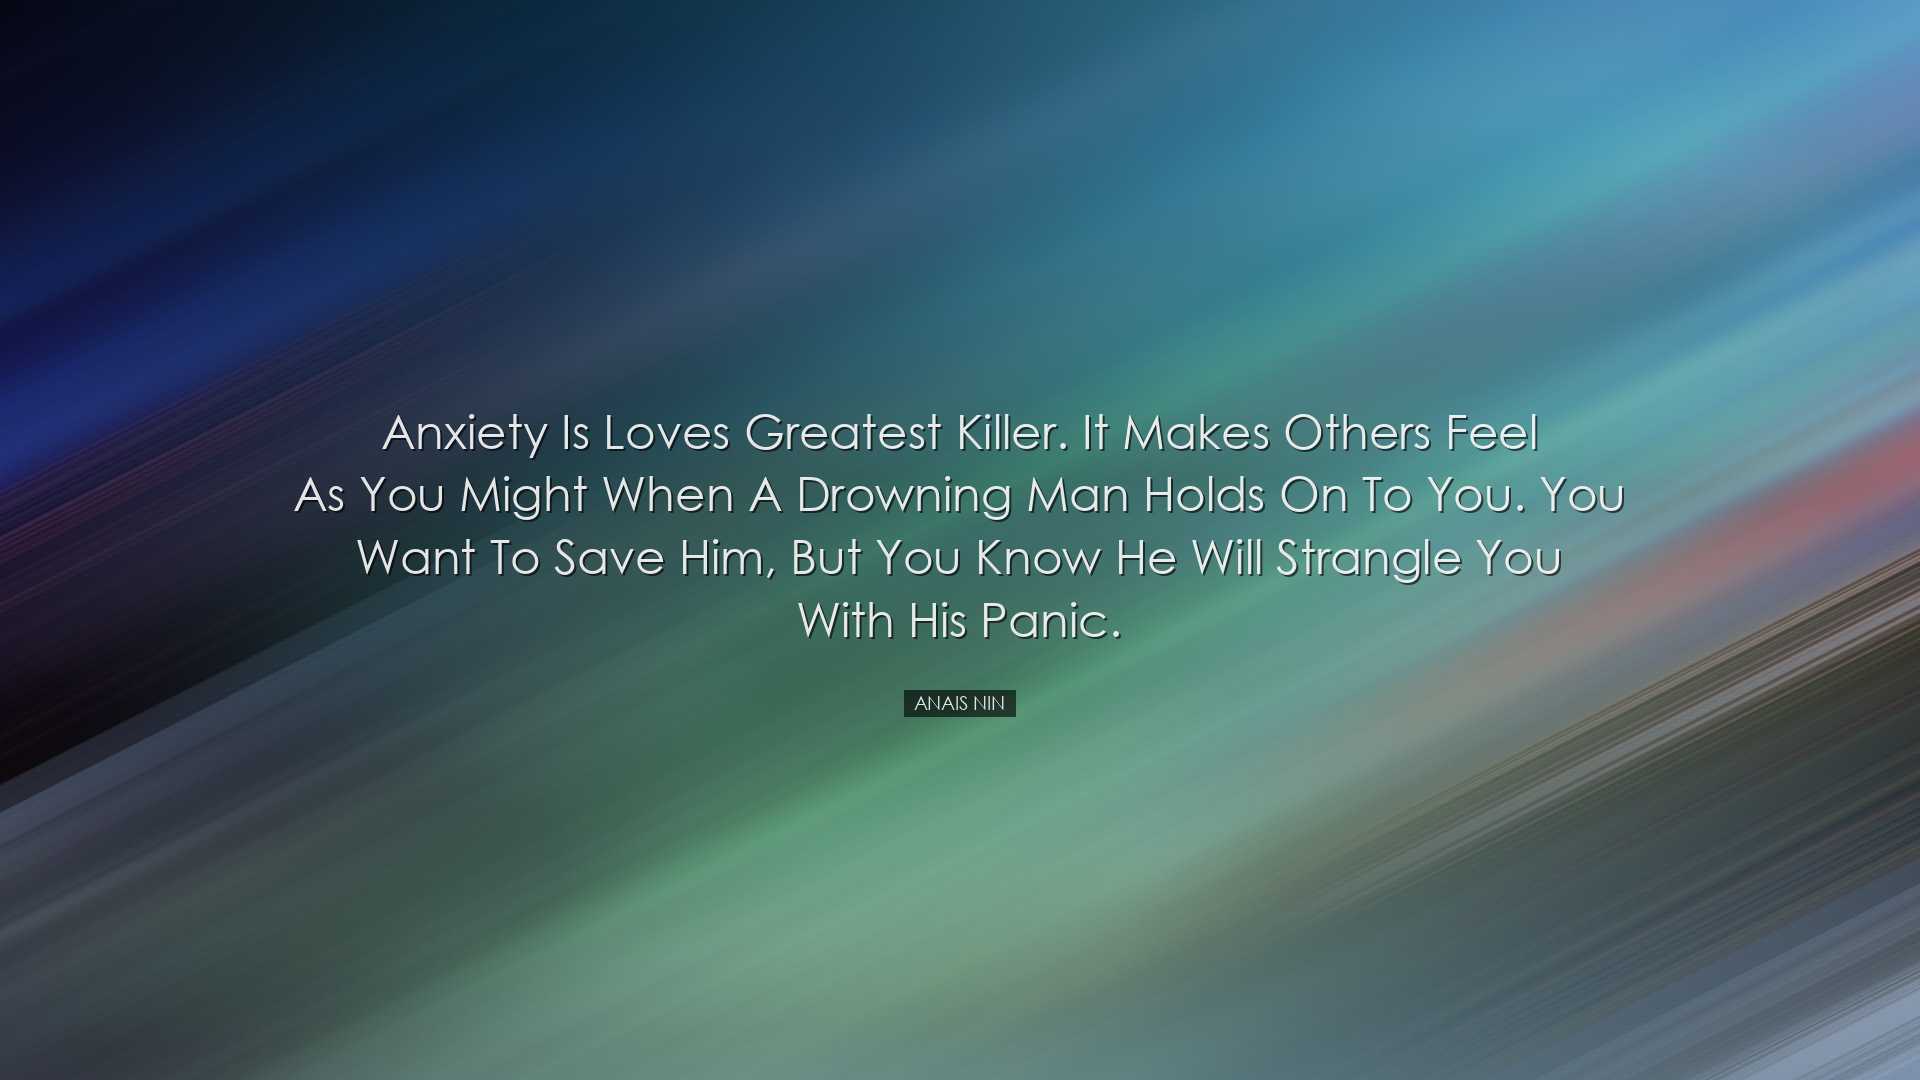 Anxiety is loves greatest killer. It makes others feel as you migh